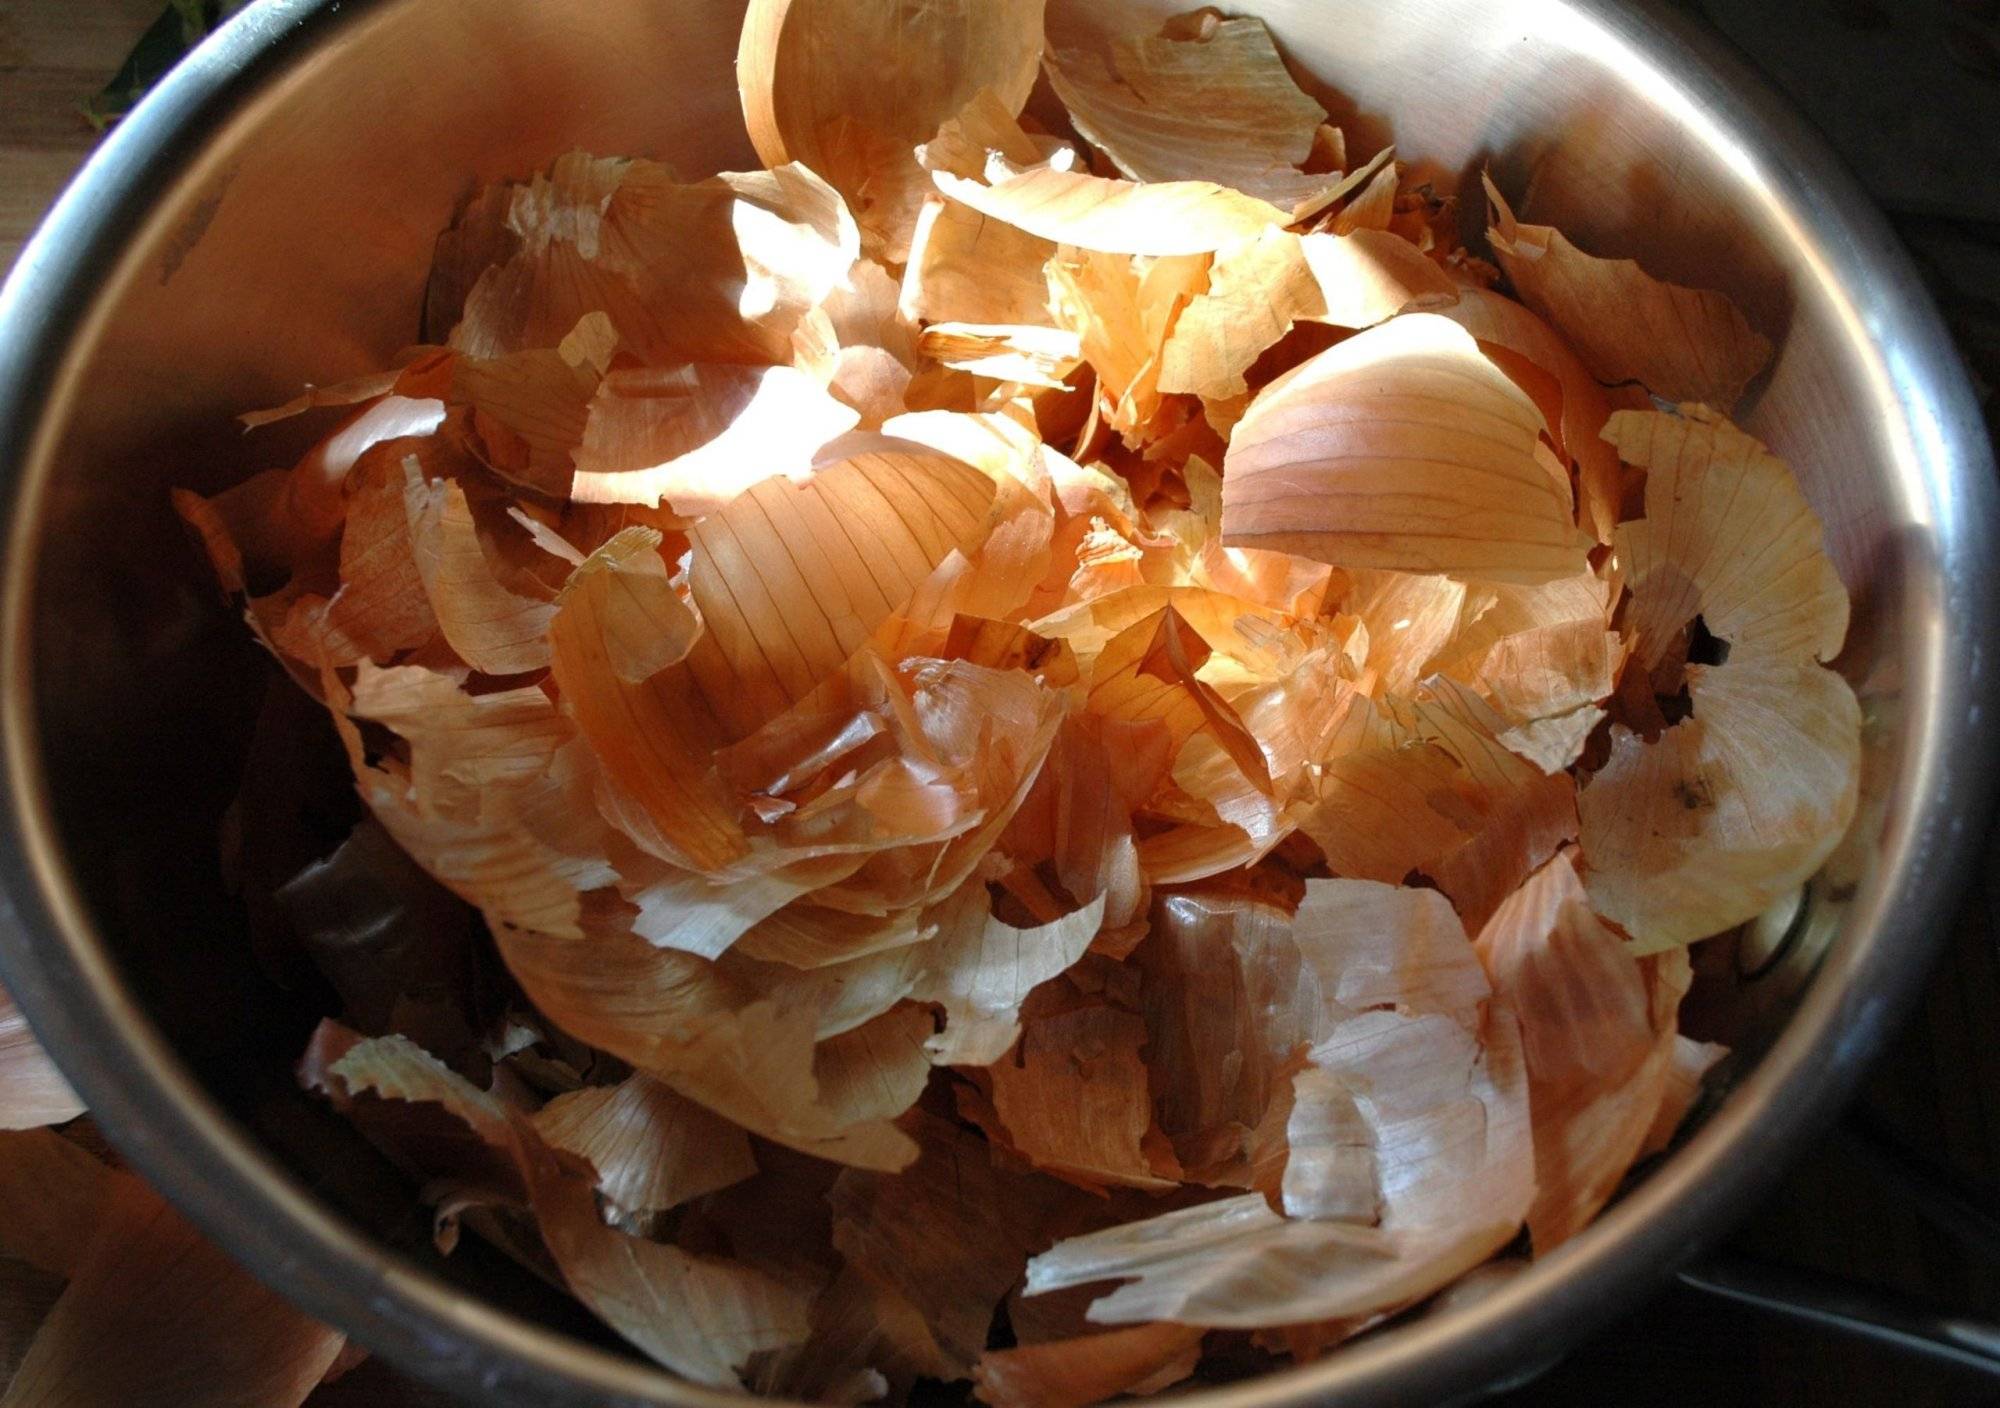 10 Onion Skin Uses That Will Make You Think Twice Before Throwing Them Away - 51